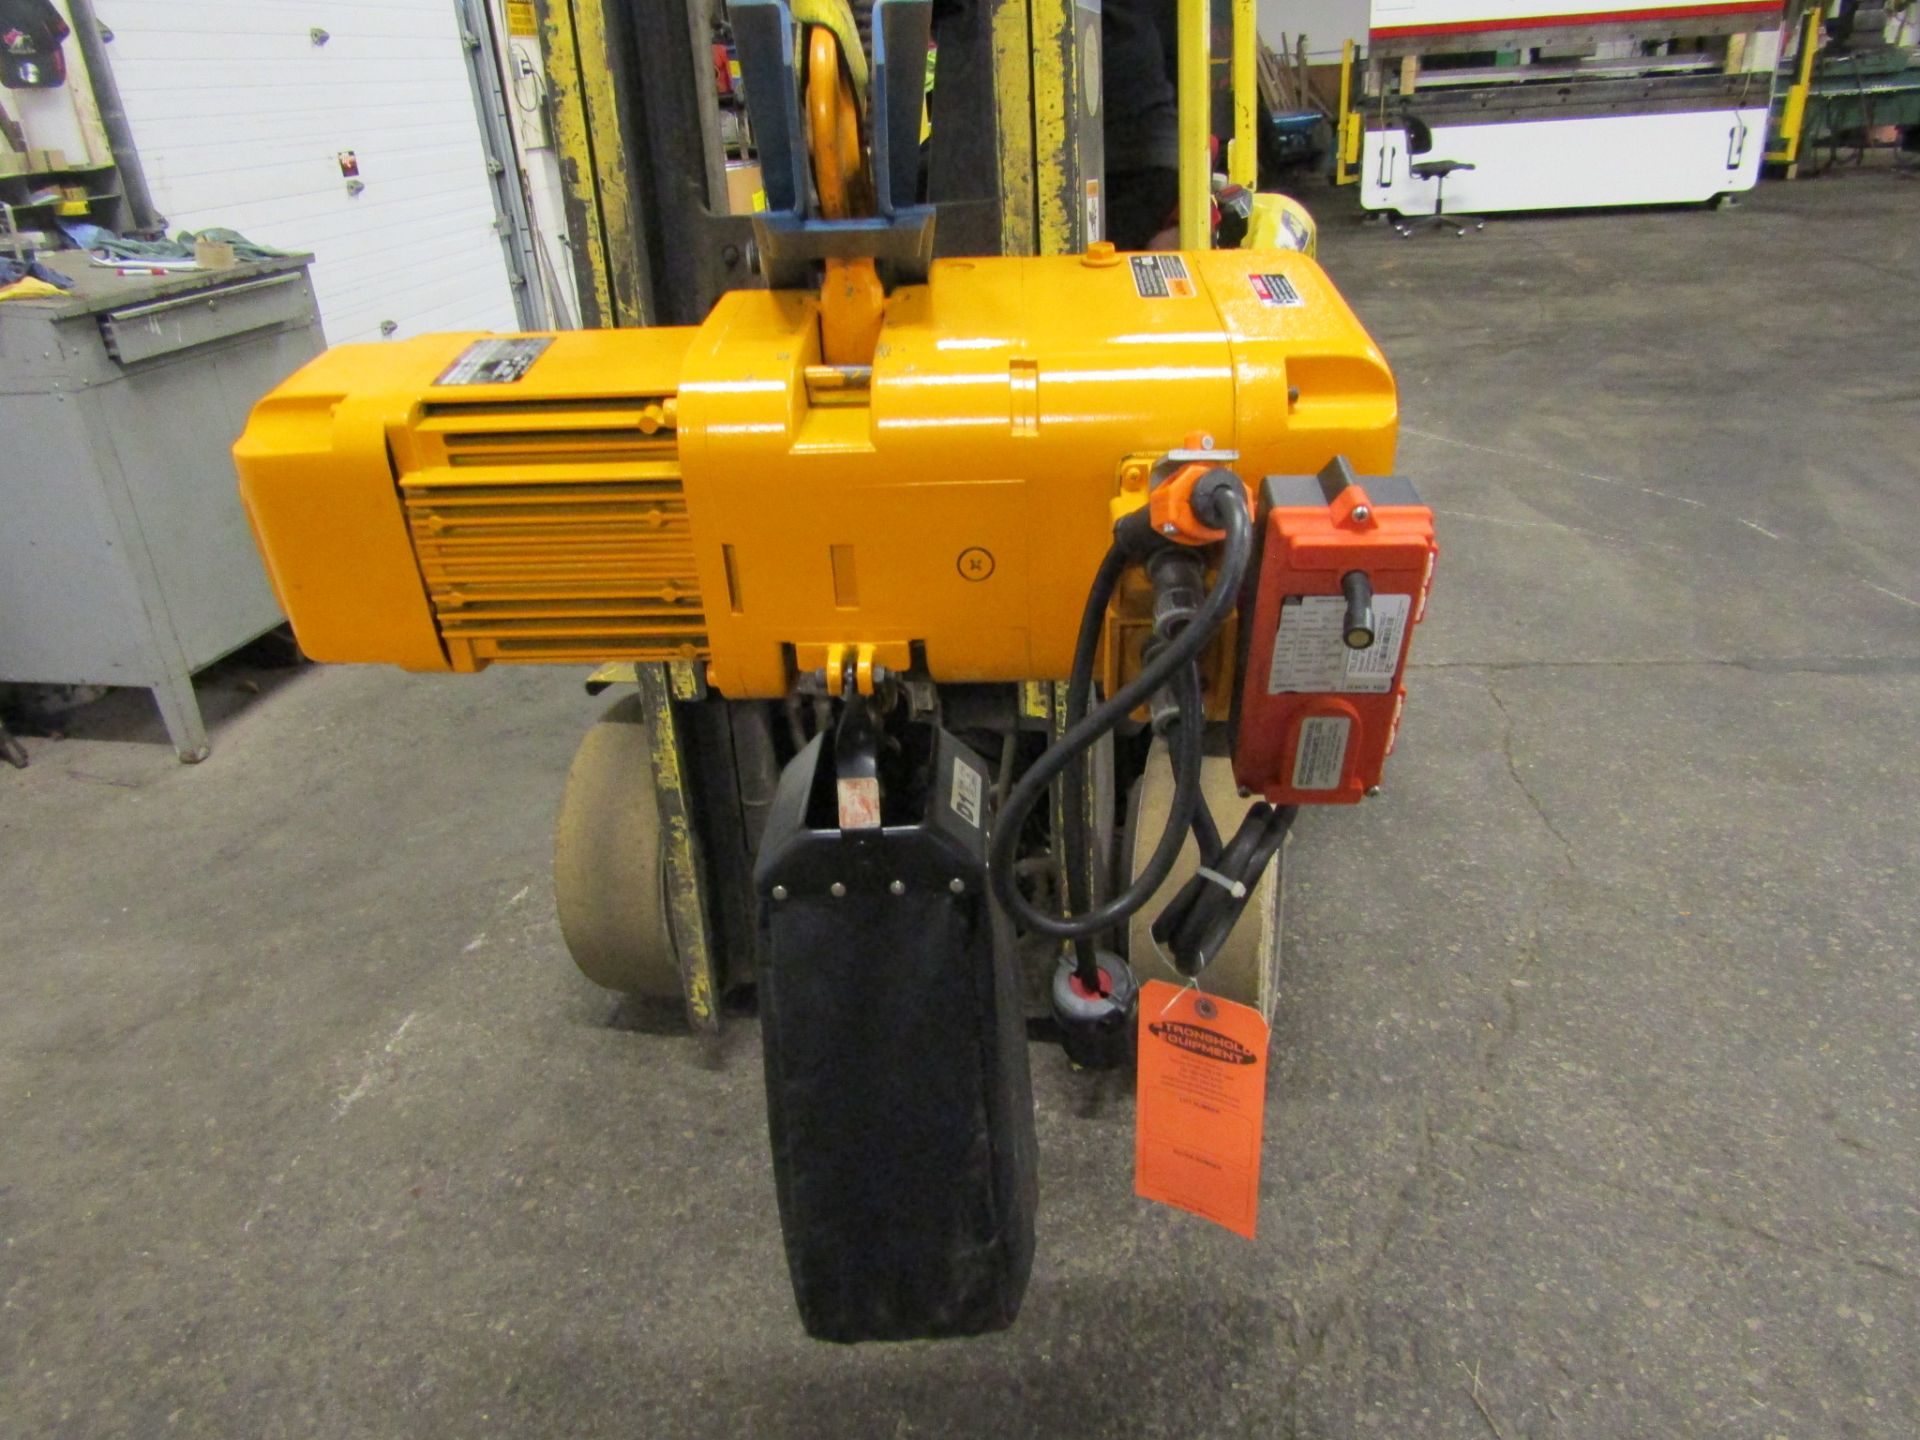 Harrington 2 Ton Electric Chain Hoist model 4H - 2000kg / 4000lbs lift capacity with trolley - Image 2 of 3